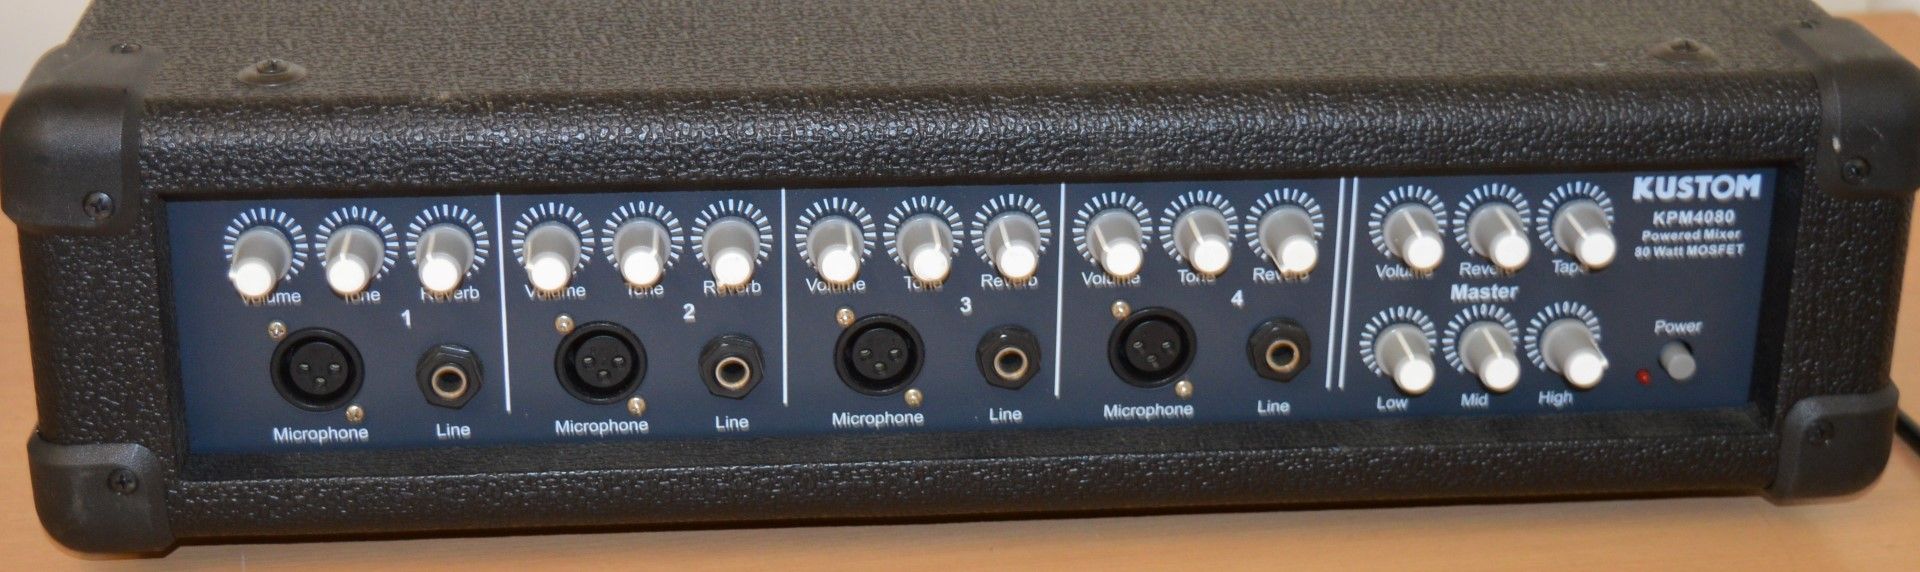 1 x Kustom KPM 4080 Powered Mixer MOSFET 80 Watt 4 Channel PA Amplifier - Unused Stock - Ideal For - Image 2 of 7